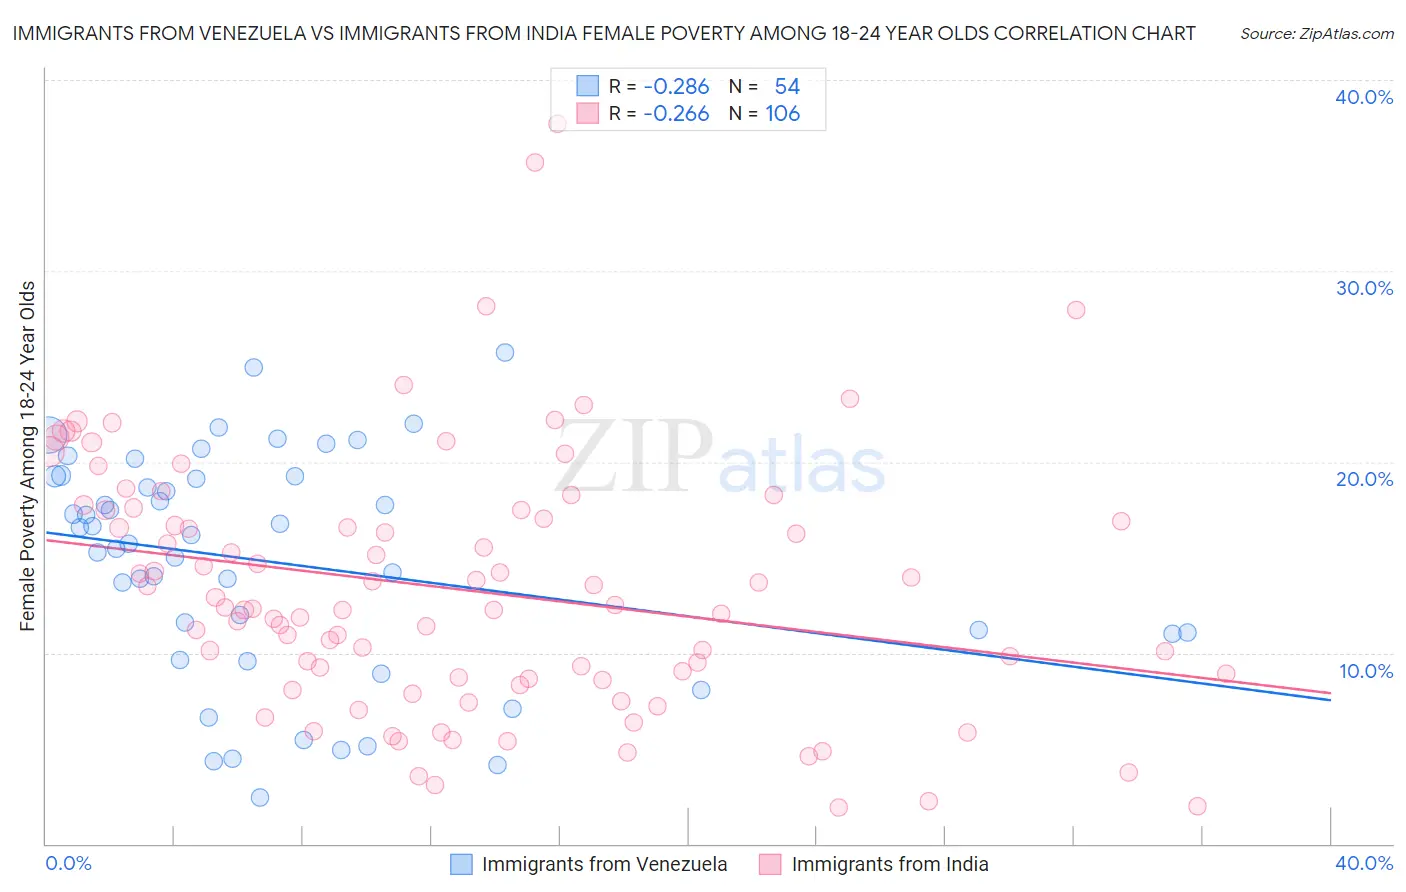 Immigrants from Venezuela vs Immigrants from India Female Poverty Among 18-24 Year Olds